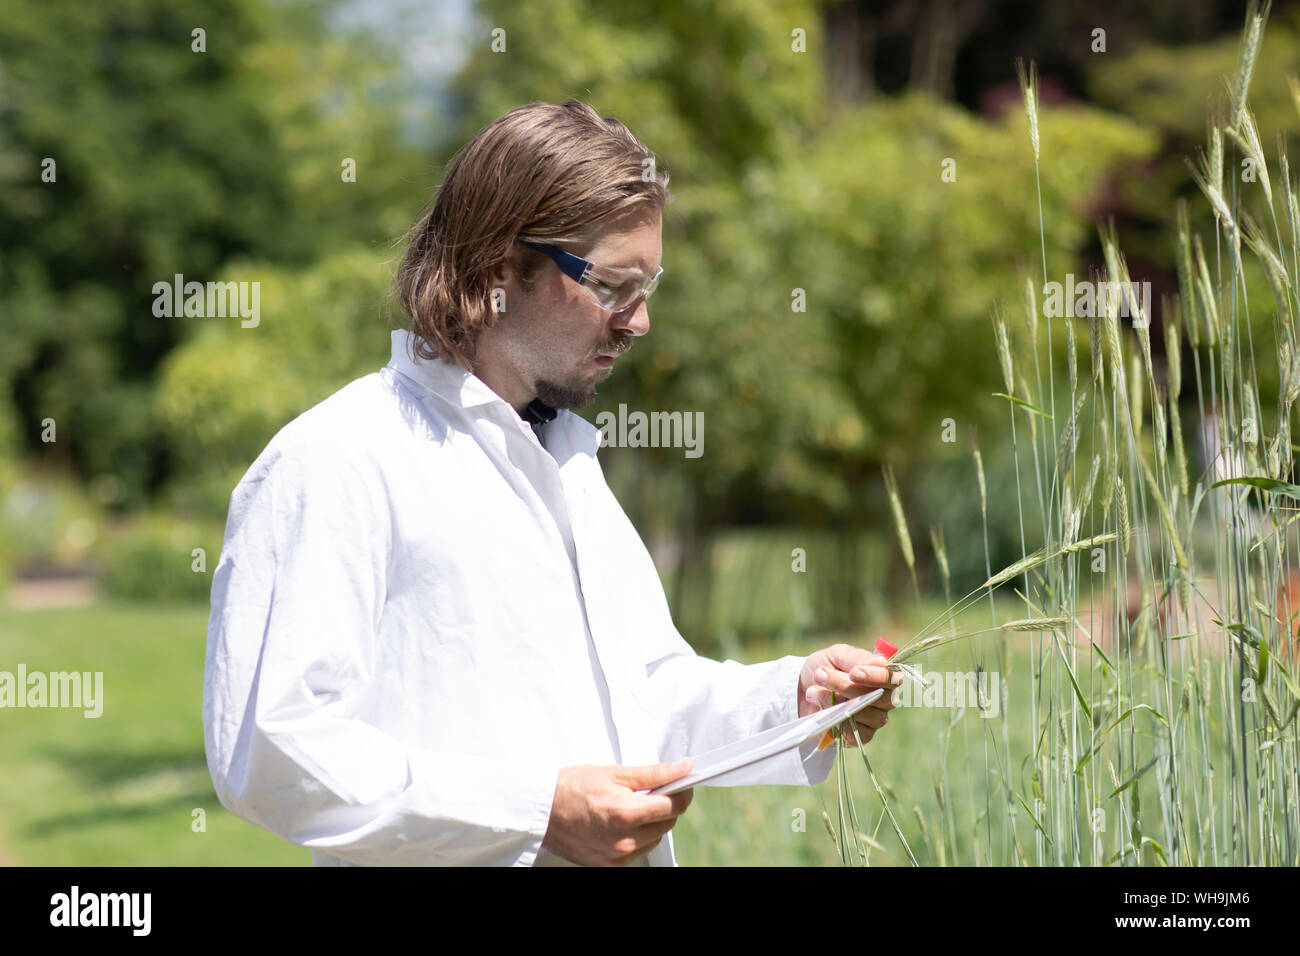 Researcher in a laboratory coat examining plants outside Stock Photo